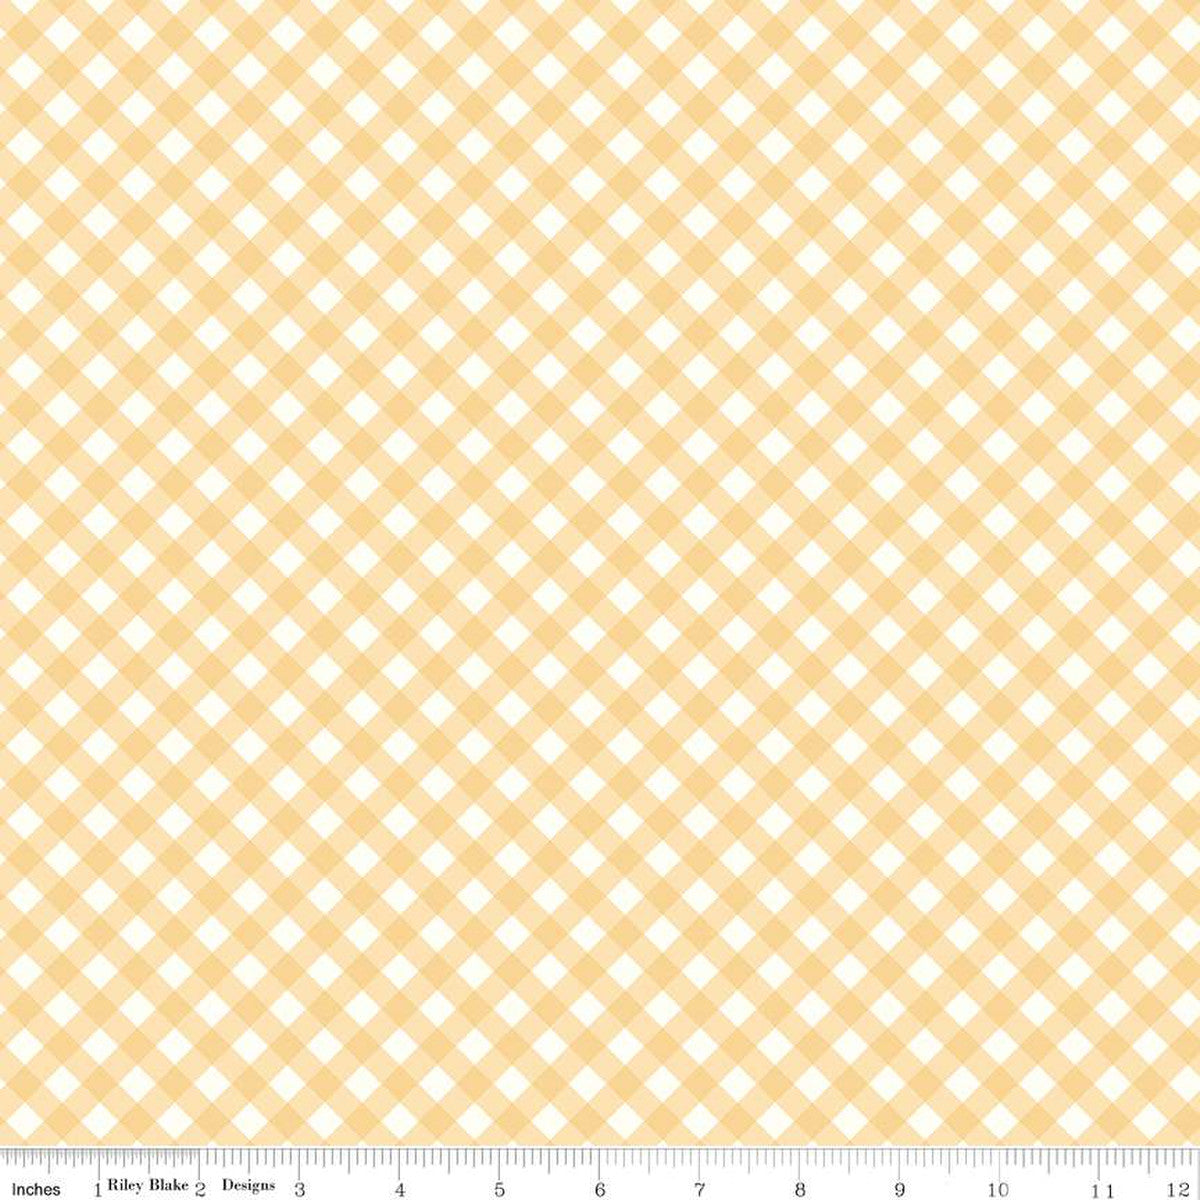 Riley Blake - Gingham - Butterscotch Bee Hive by Shaleen Louise